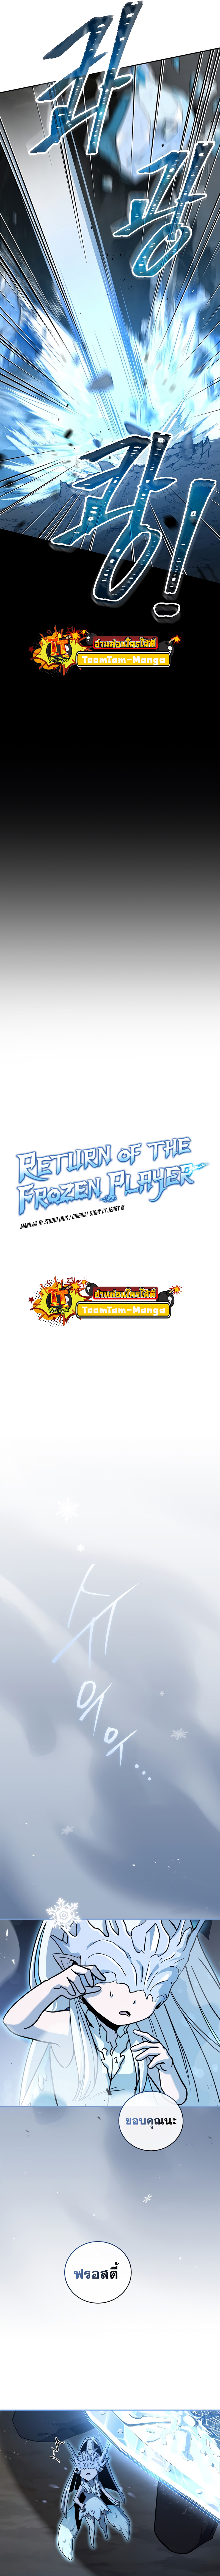 Return of the frozen player53 02